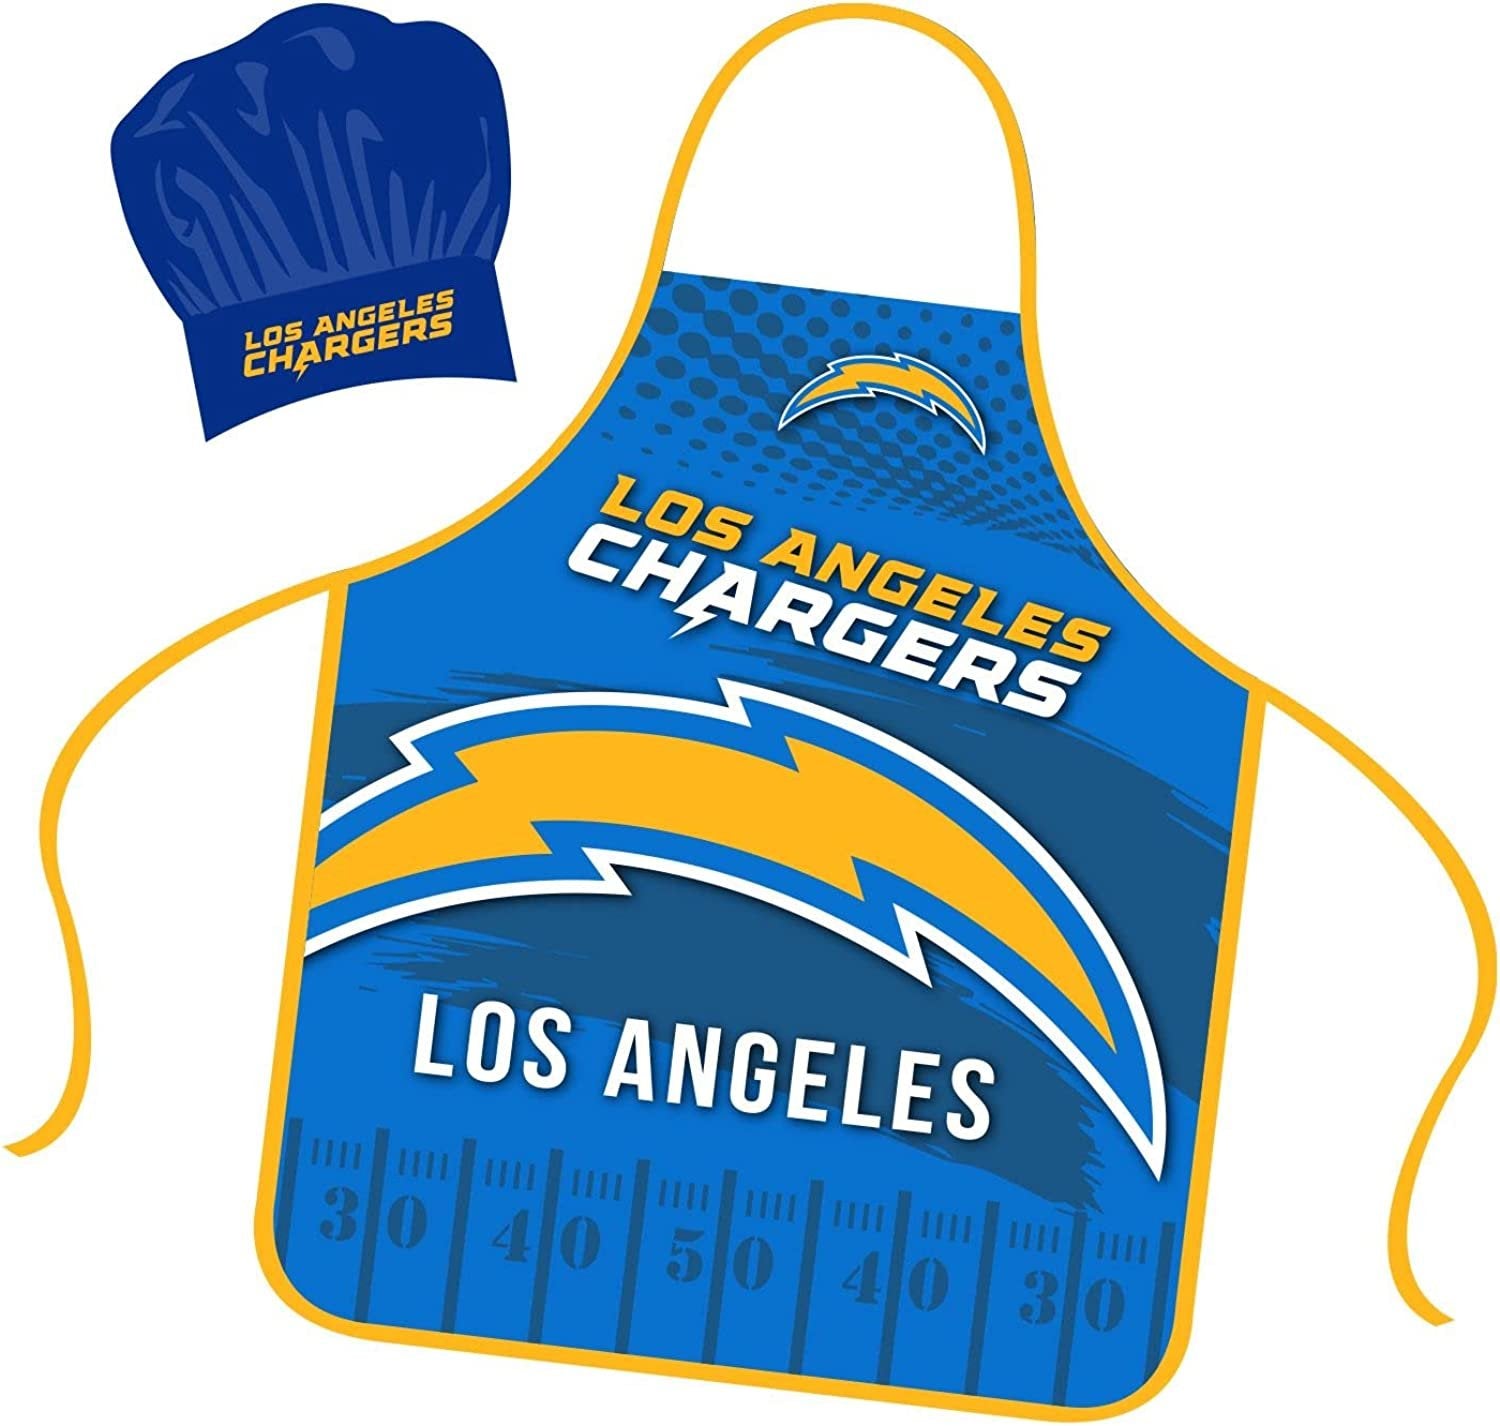 Los Angeles Chargers Apron Chef Hat Set Full Color Universal Size Tie Back Grilling Tailgate BBQ Cooking Host